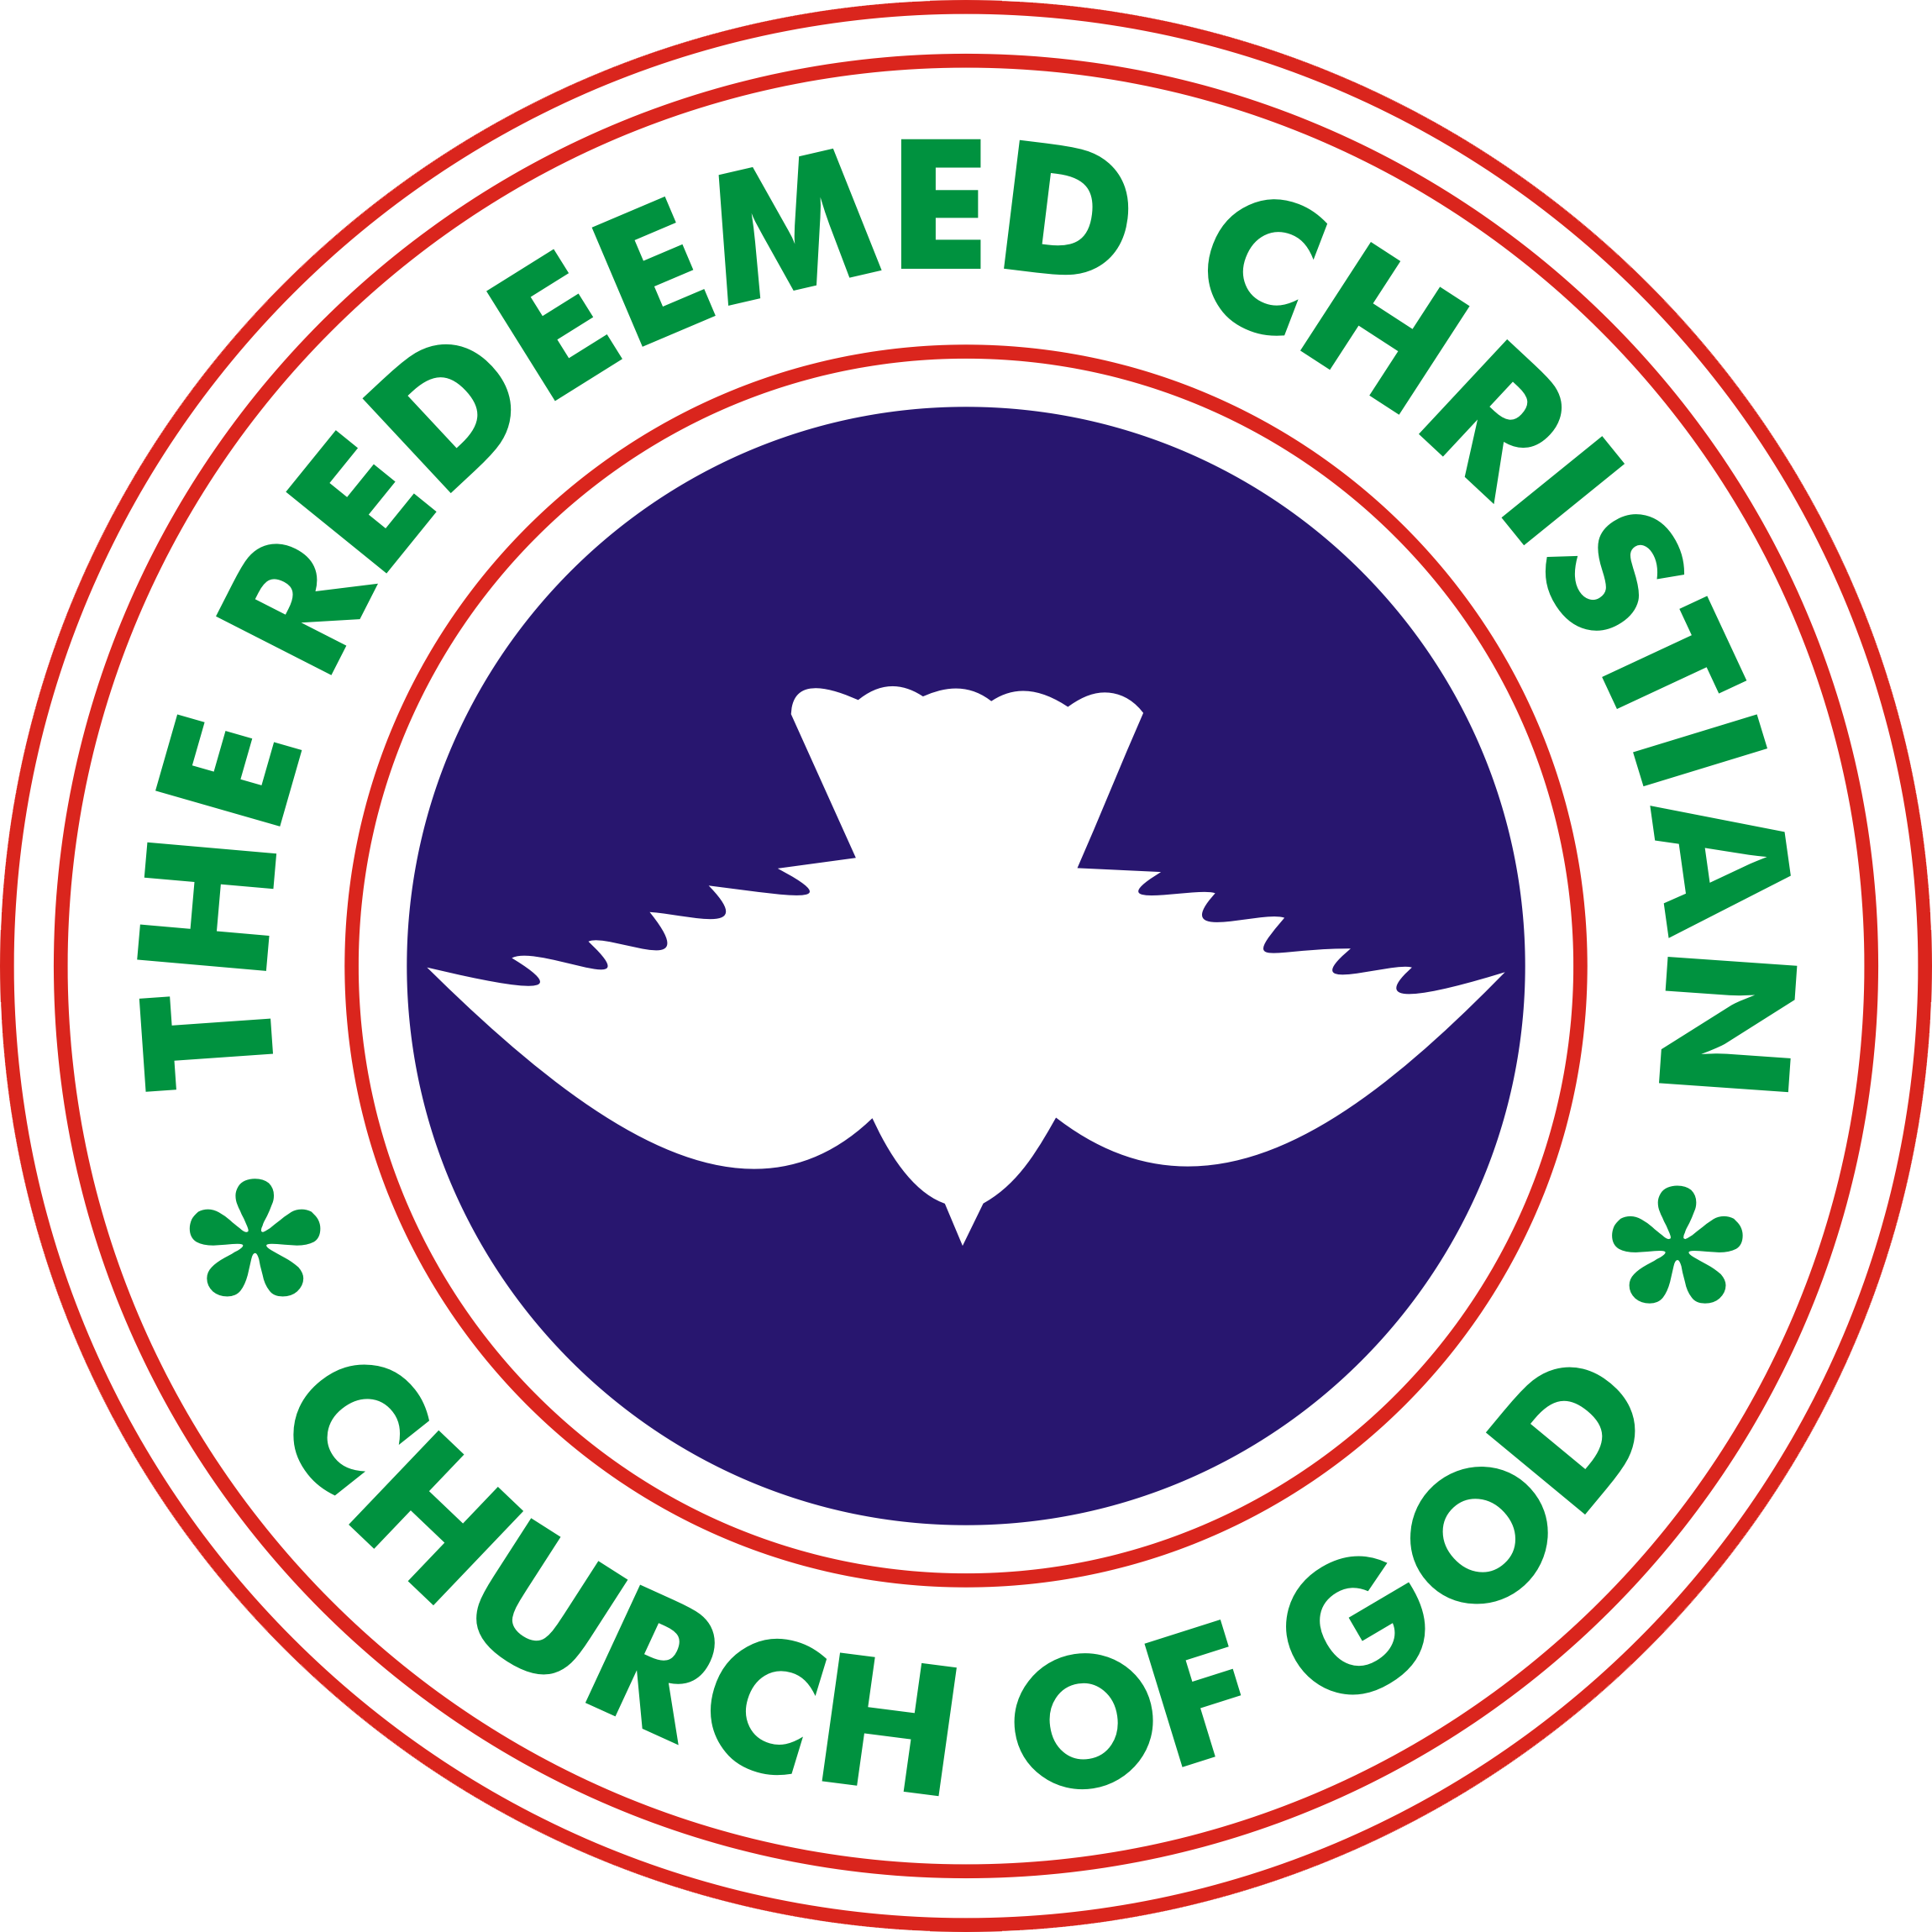 The Redeemed Christian Church of God-Overcomer's Assembly